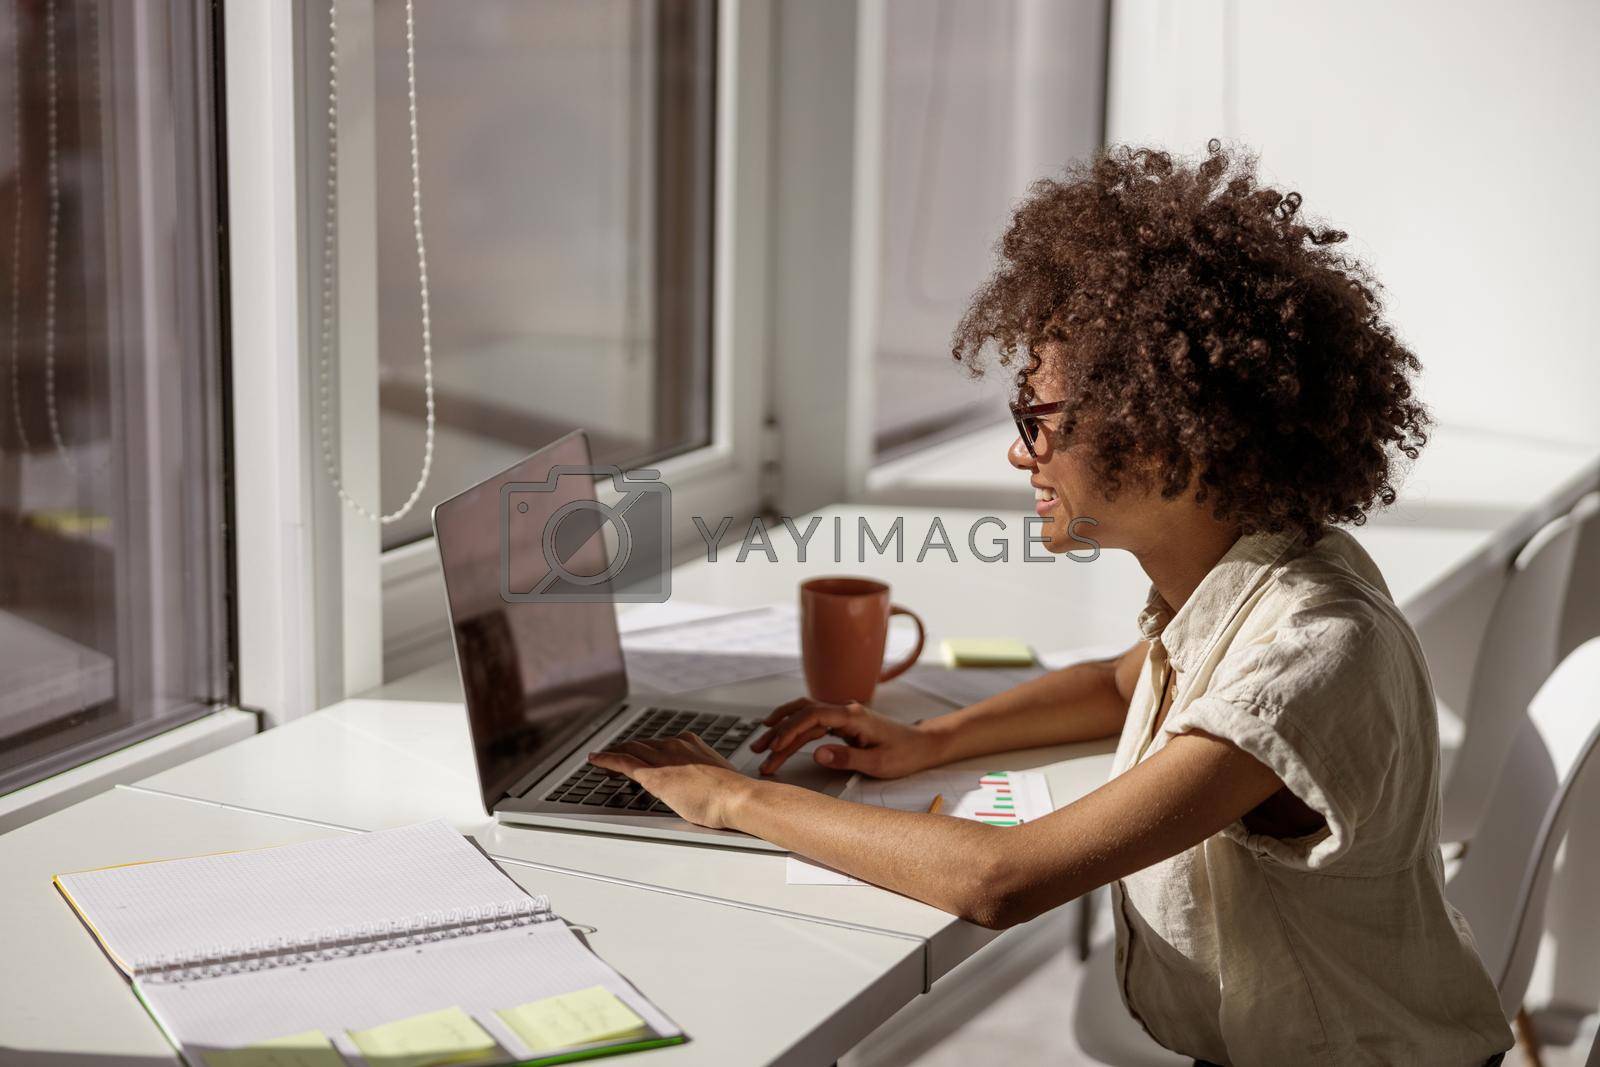 Royalty free image of African American woman concentrated looking at computer screen by Yaroslav_astakhov